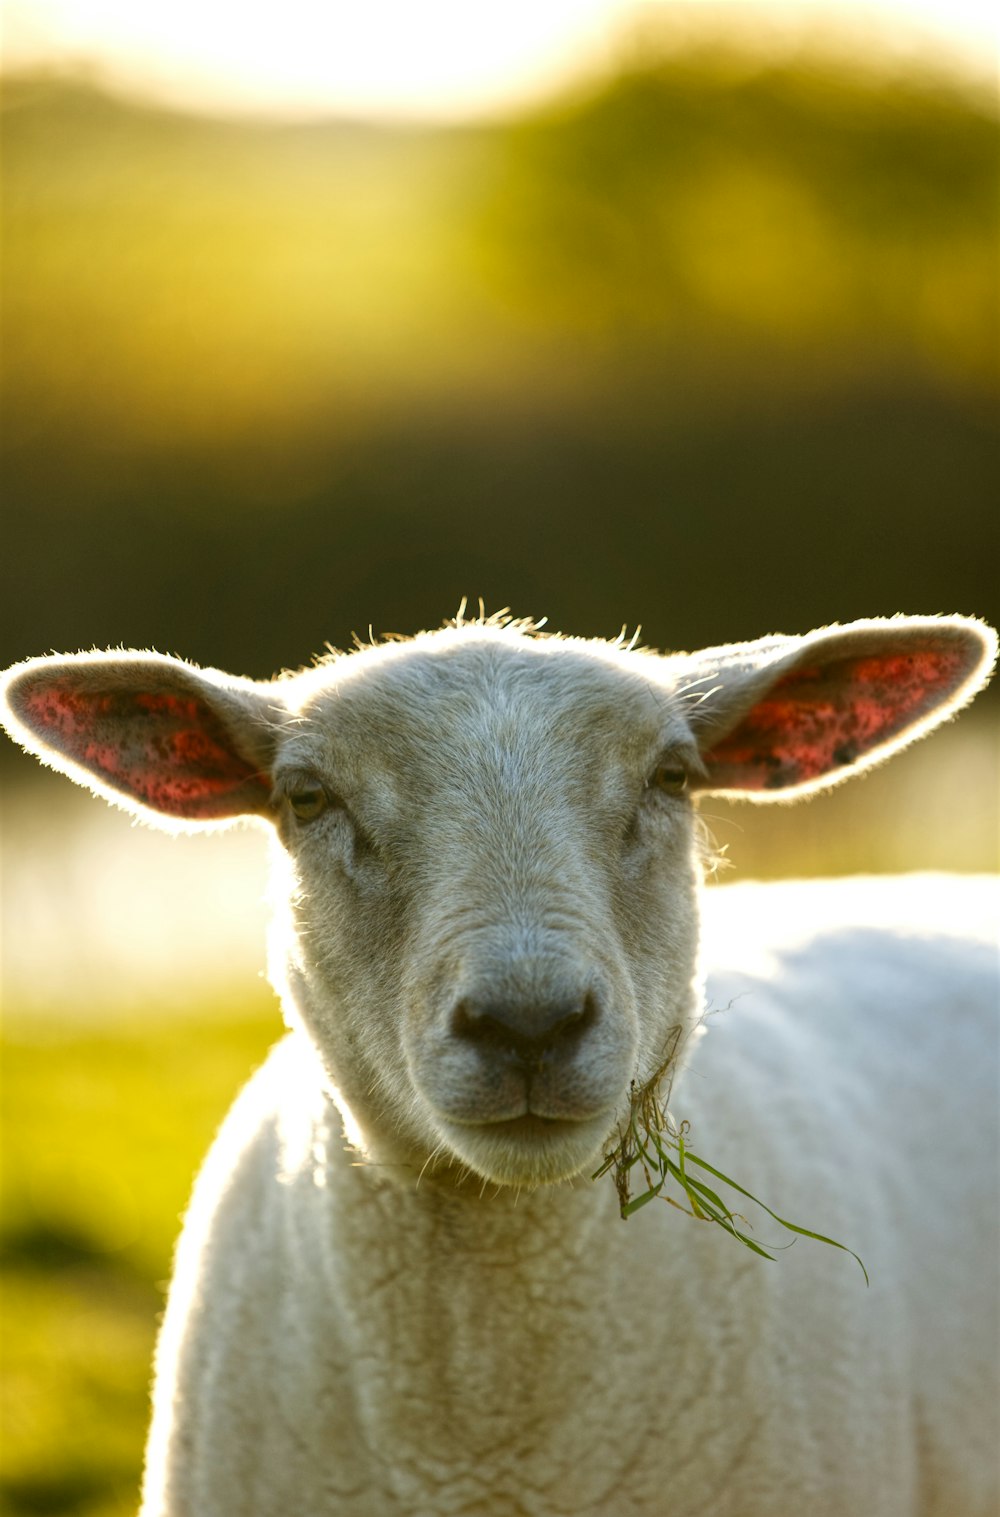 a close up of a sheep with grass in its mouth